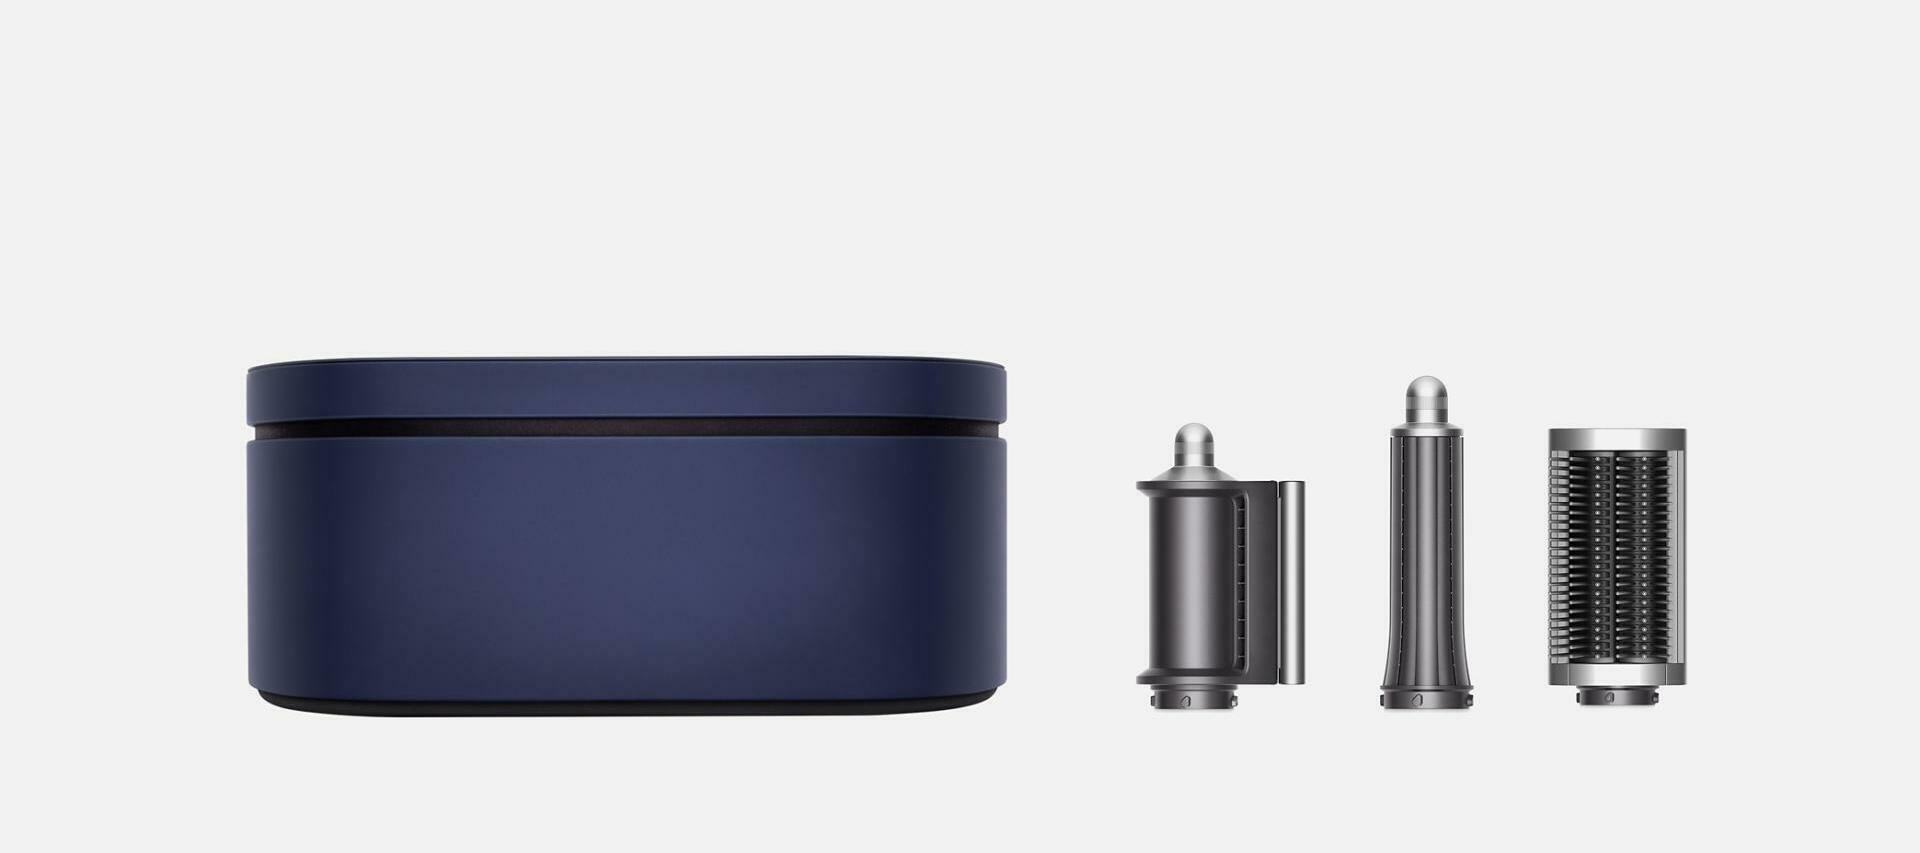 Dyson Airwrap™ multi-styler: Understanding the attachment and accessories